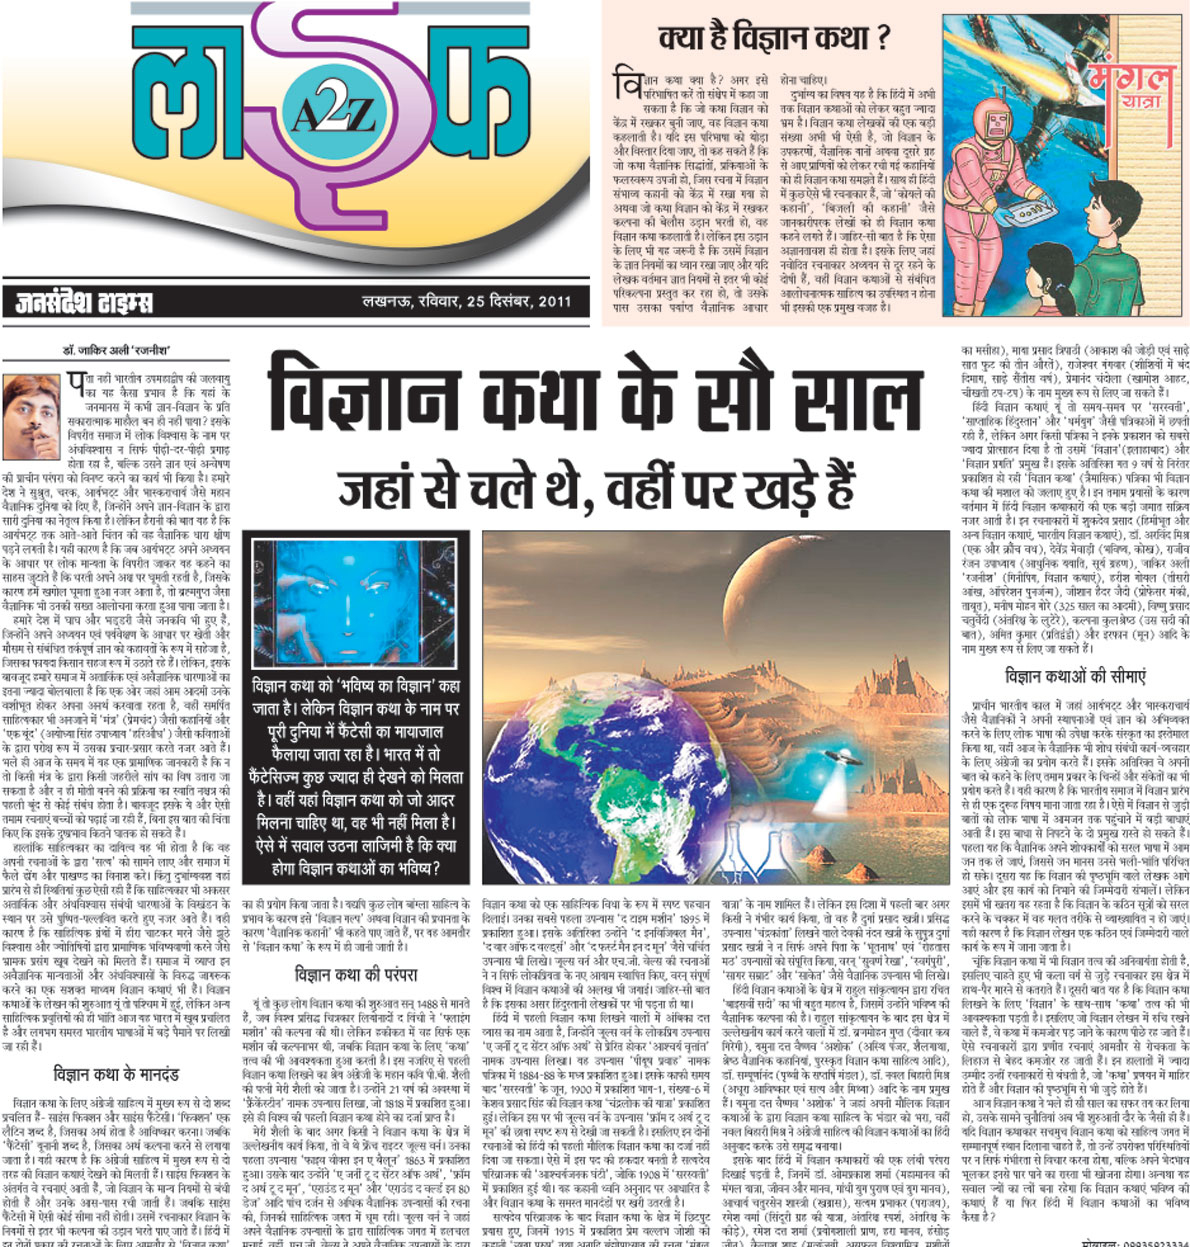 Science Fiction in Hindi